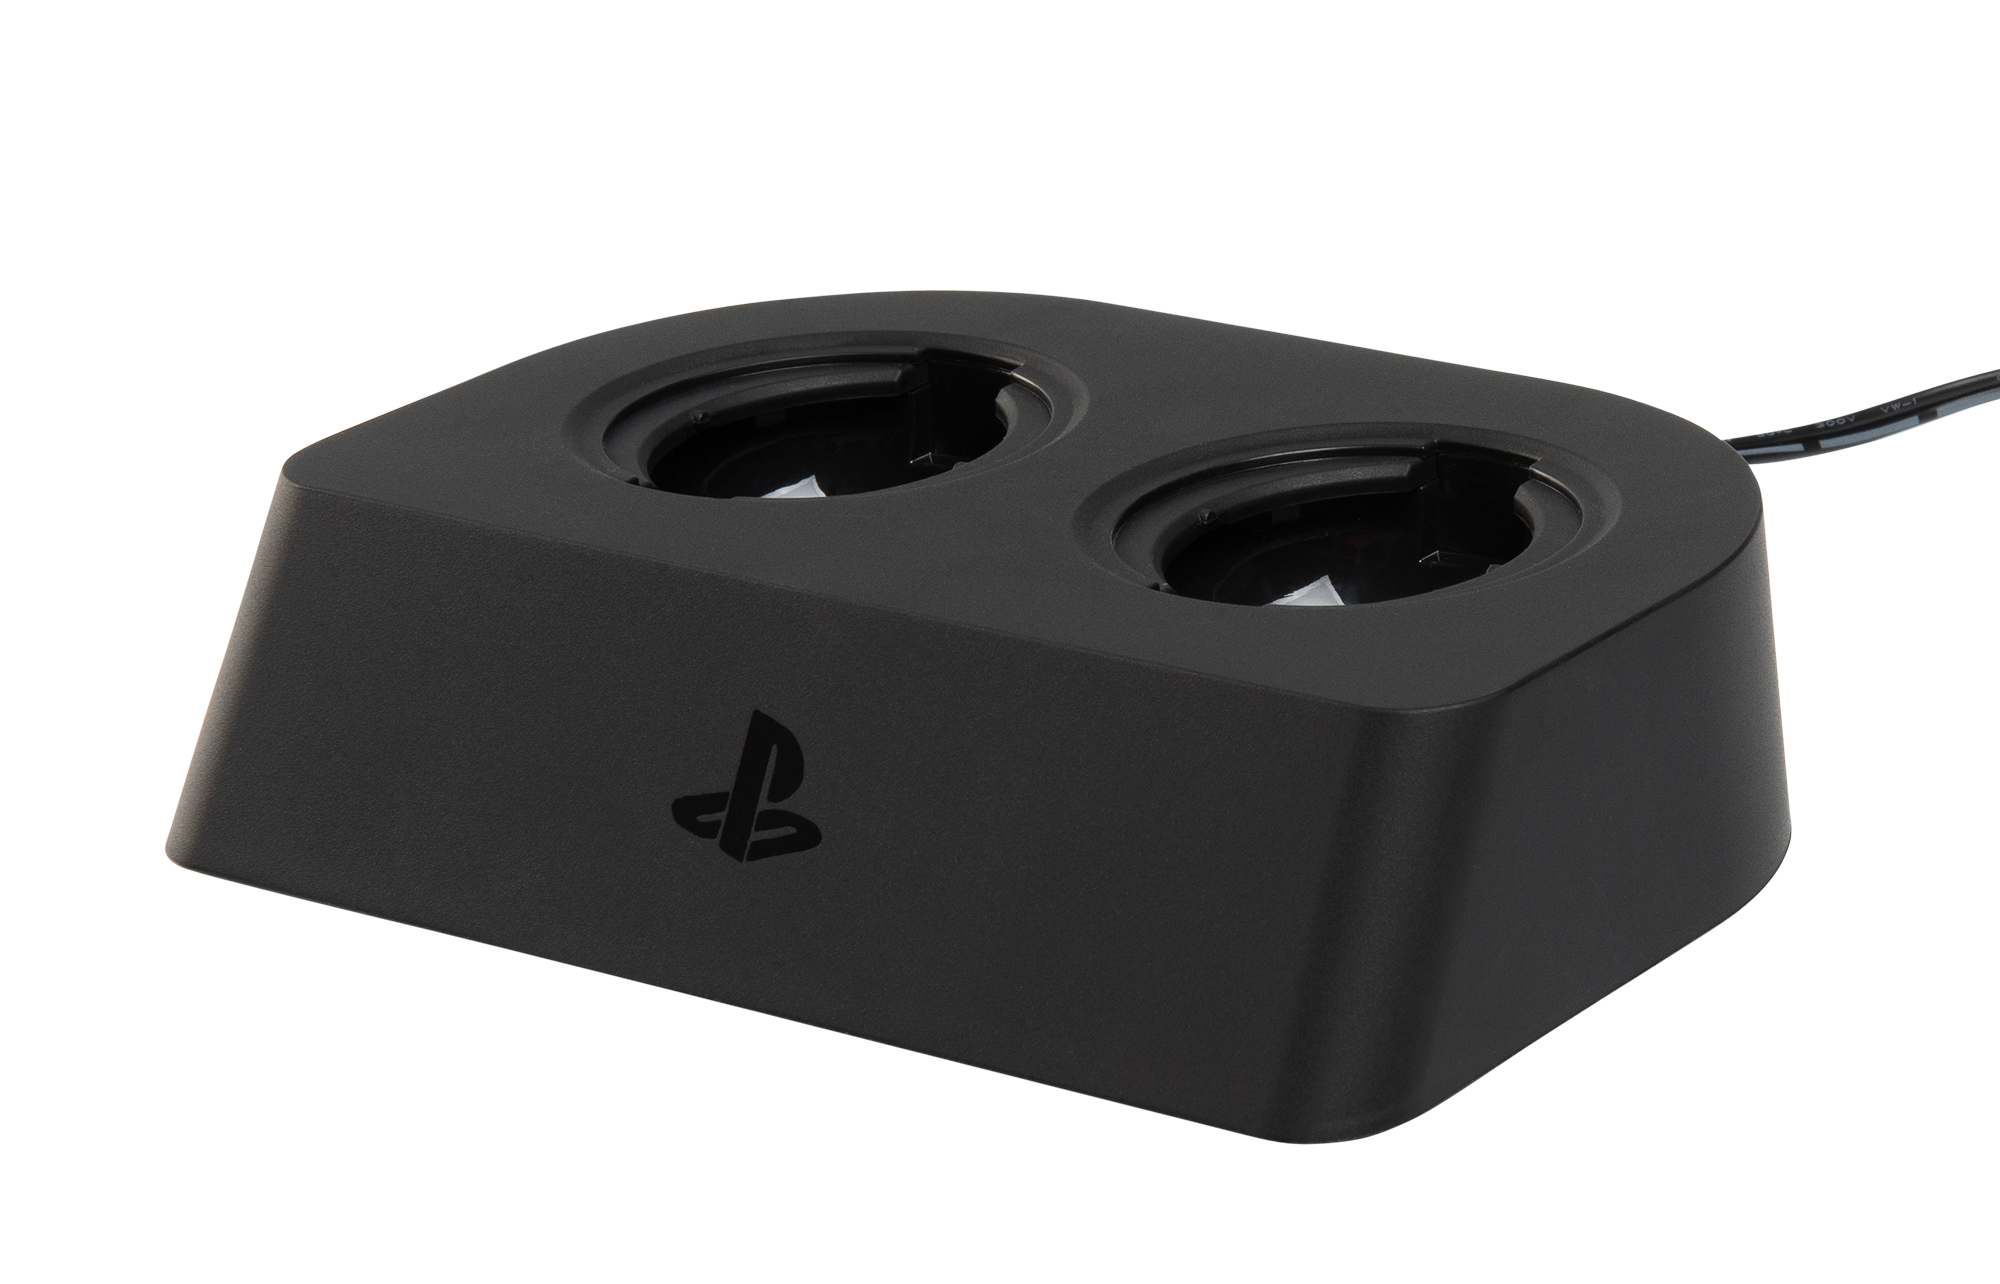 ps4 motion controller vr